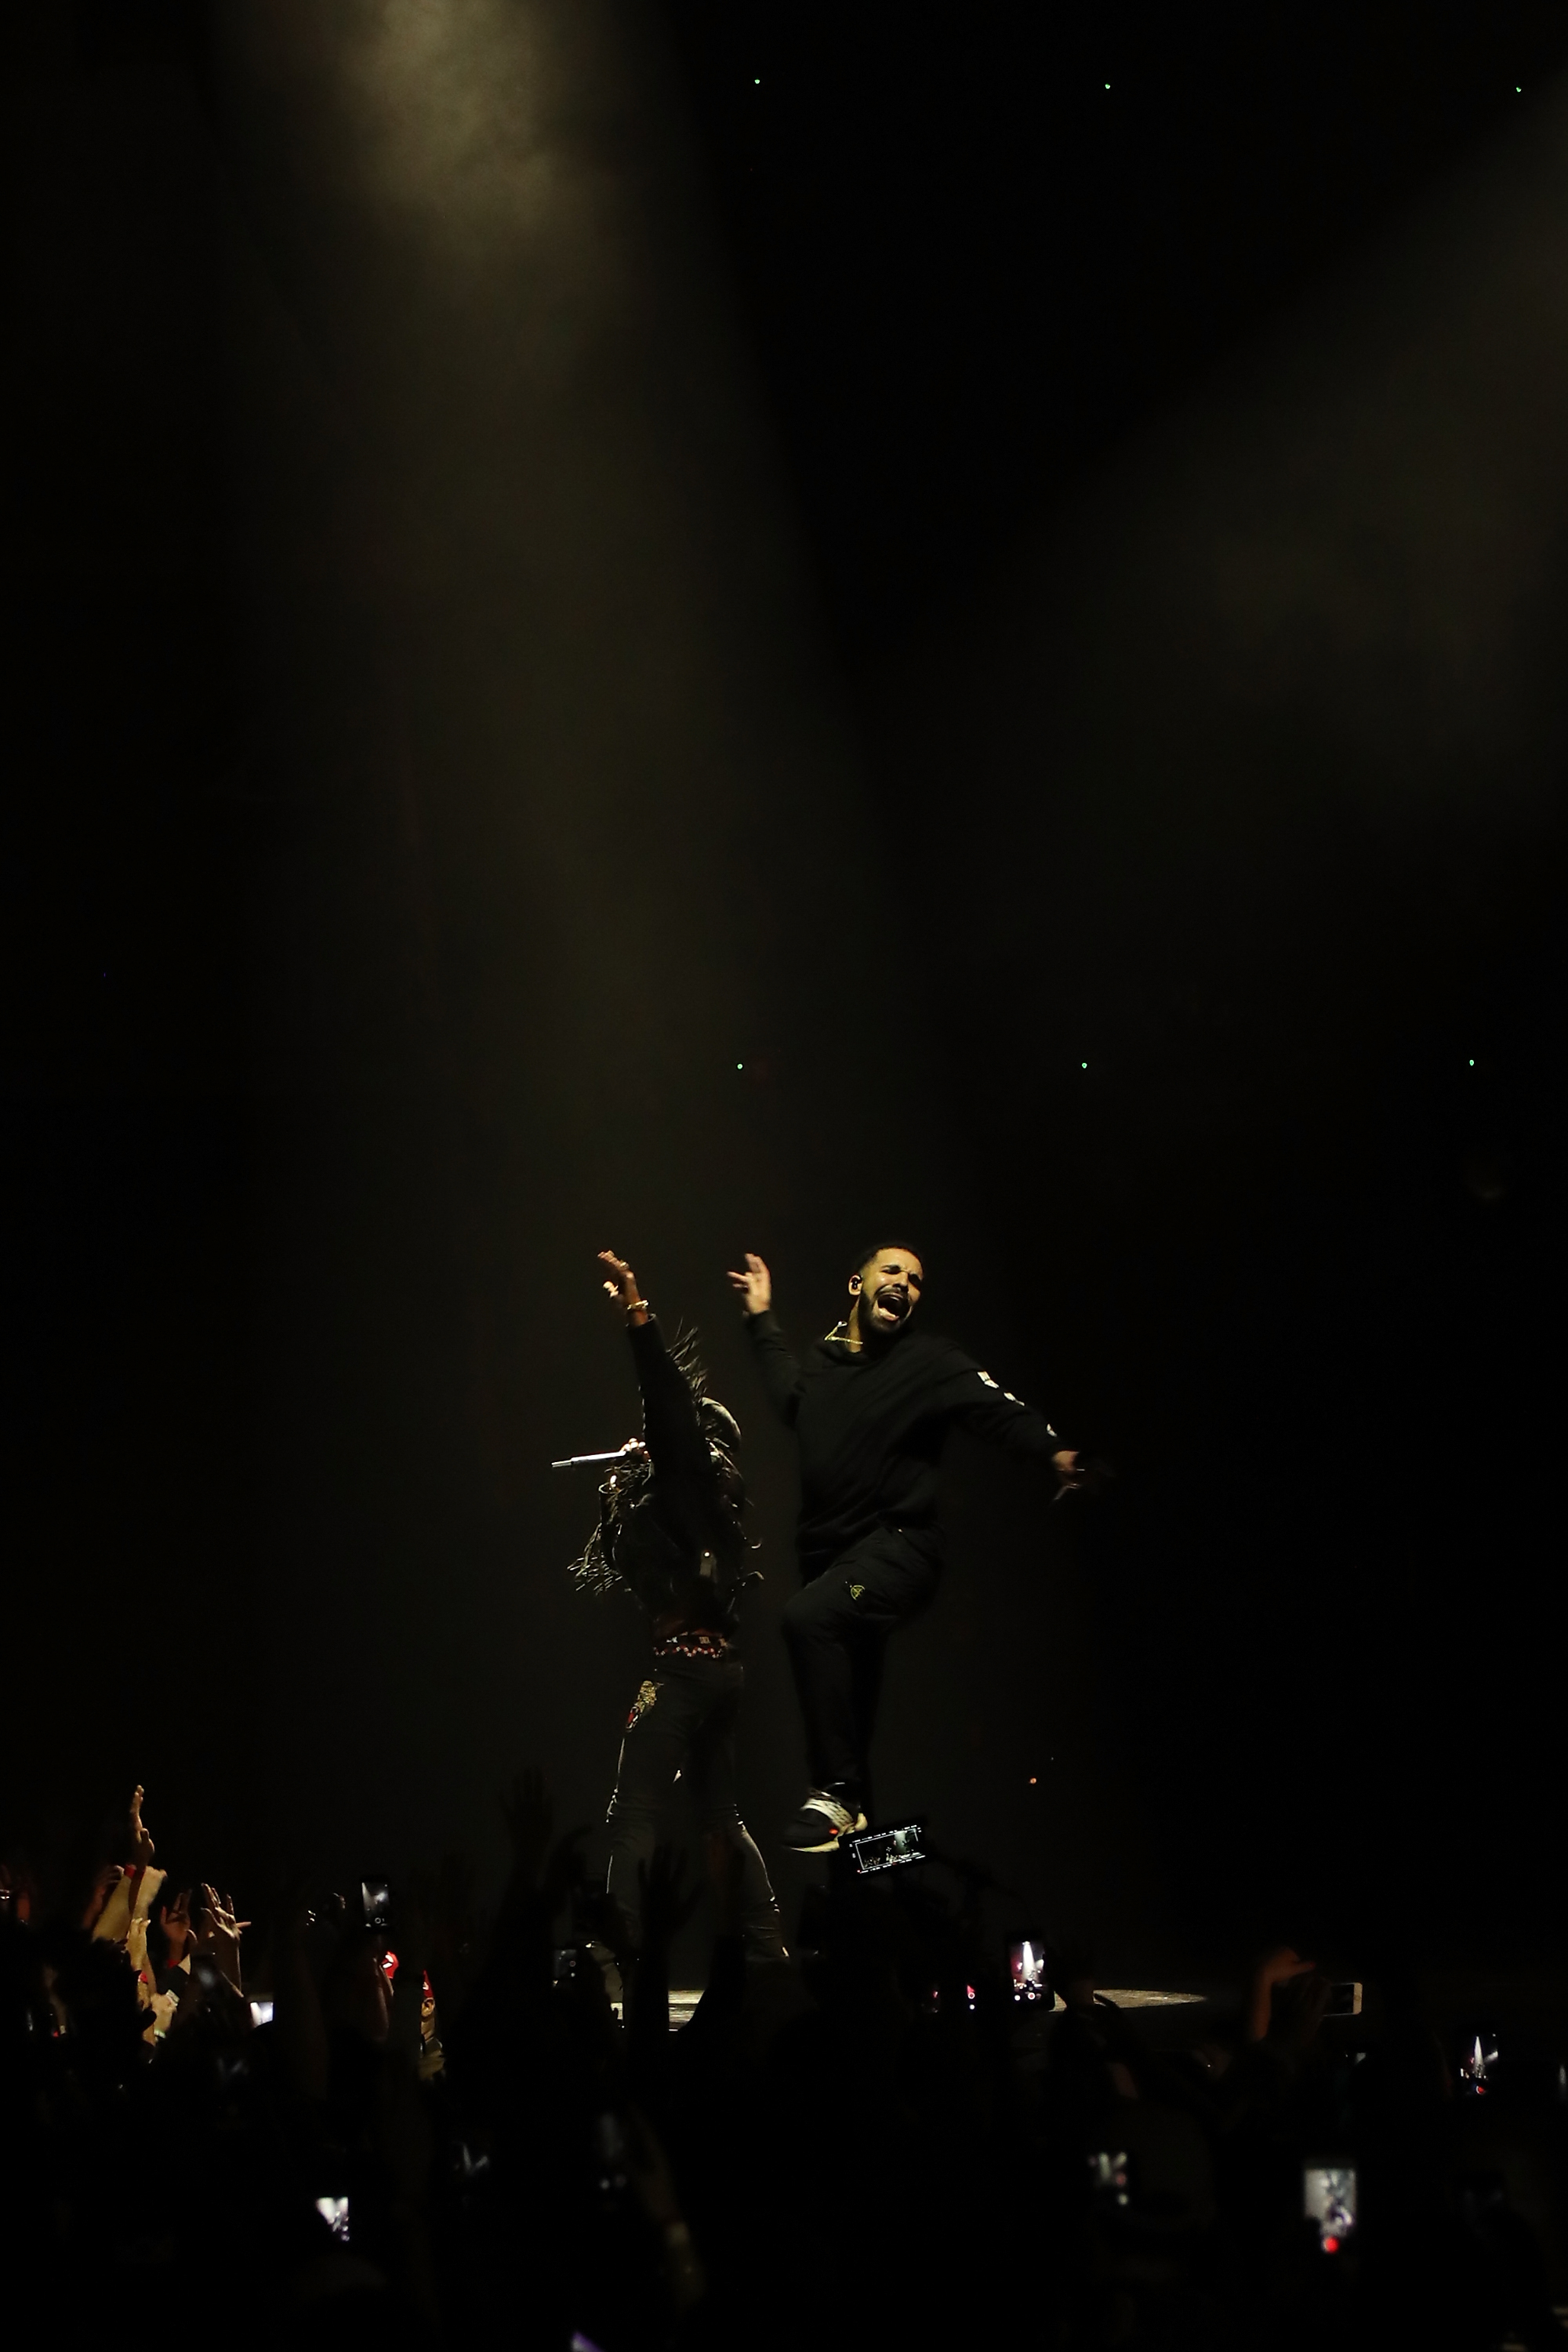 Drake performing onstage in a spotlight with an audience in the foreground